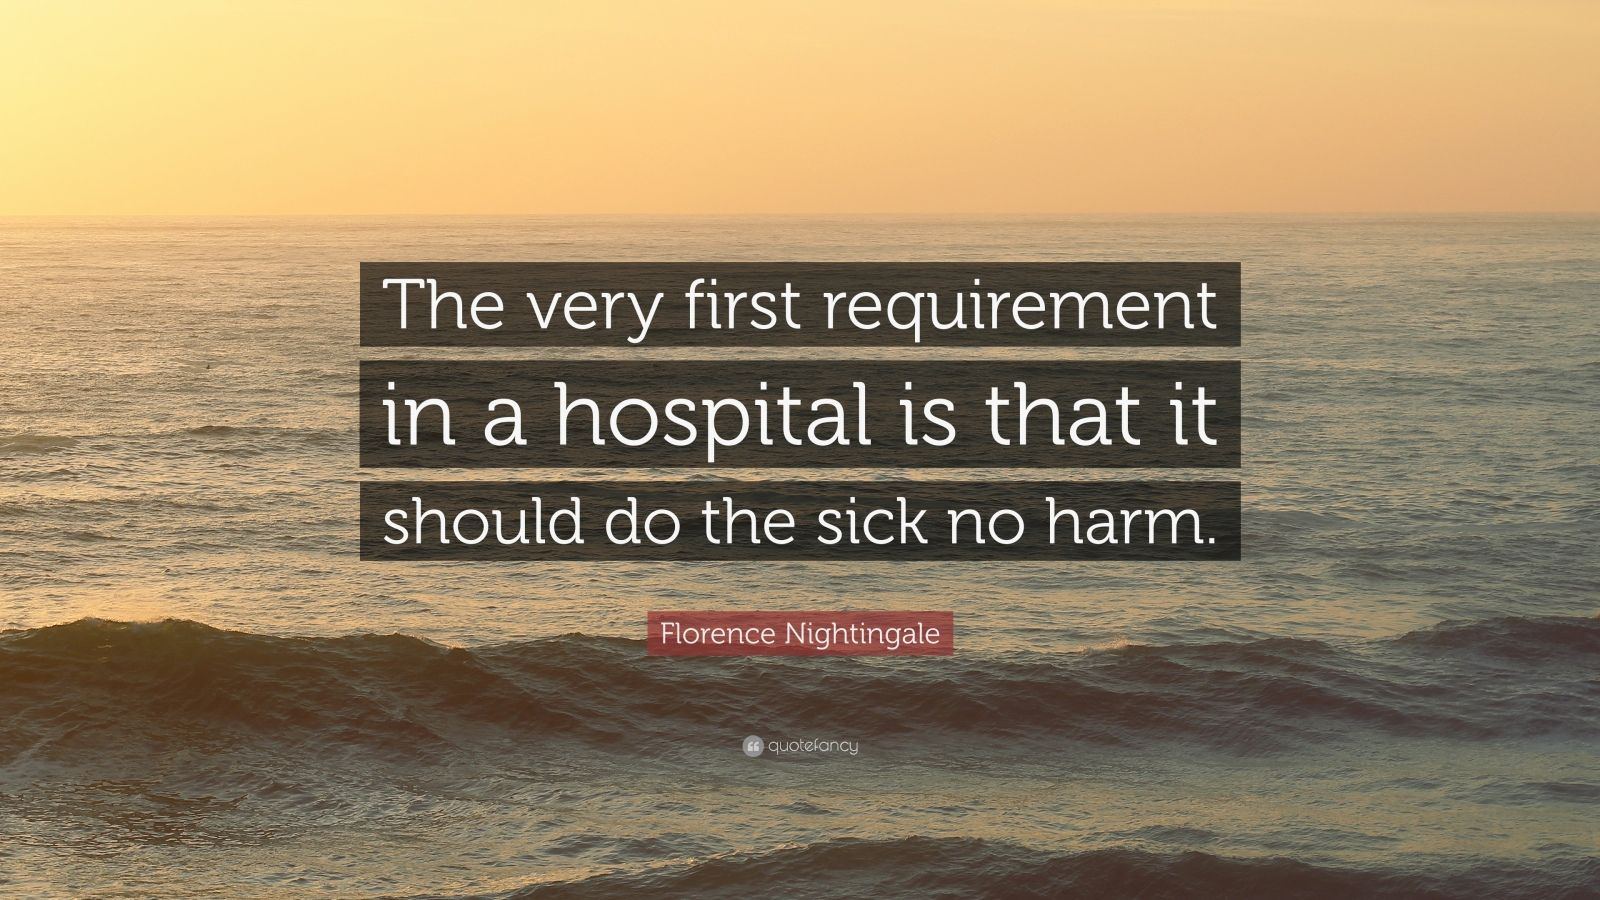 Florence Nightingale Quote: “The very first requirement in a hospital